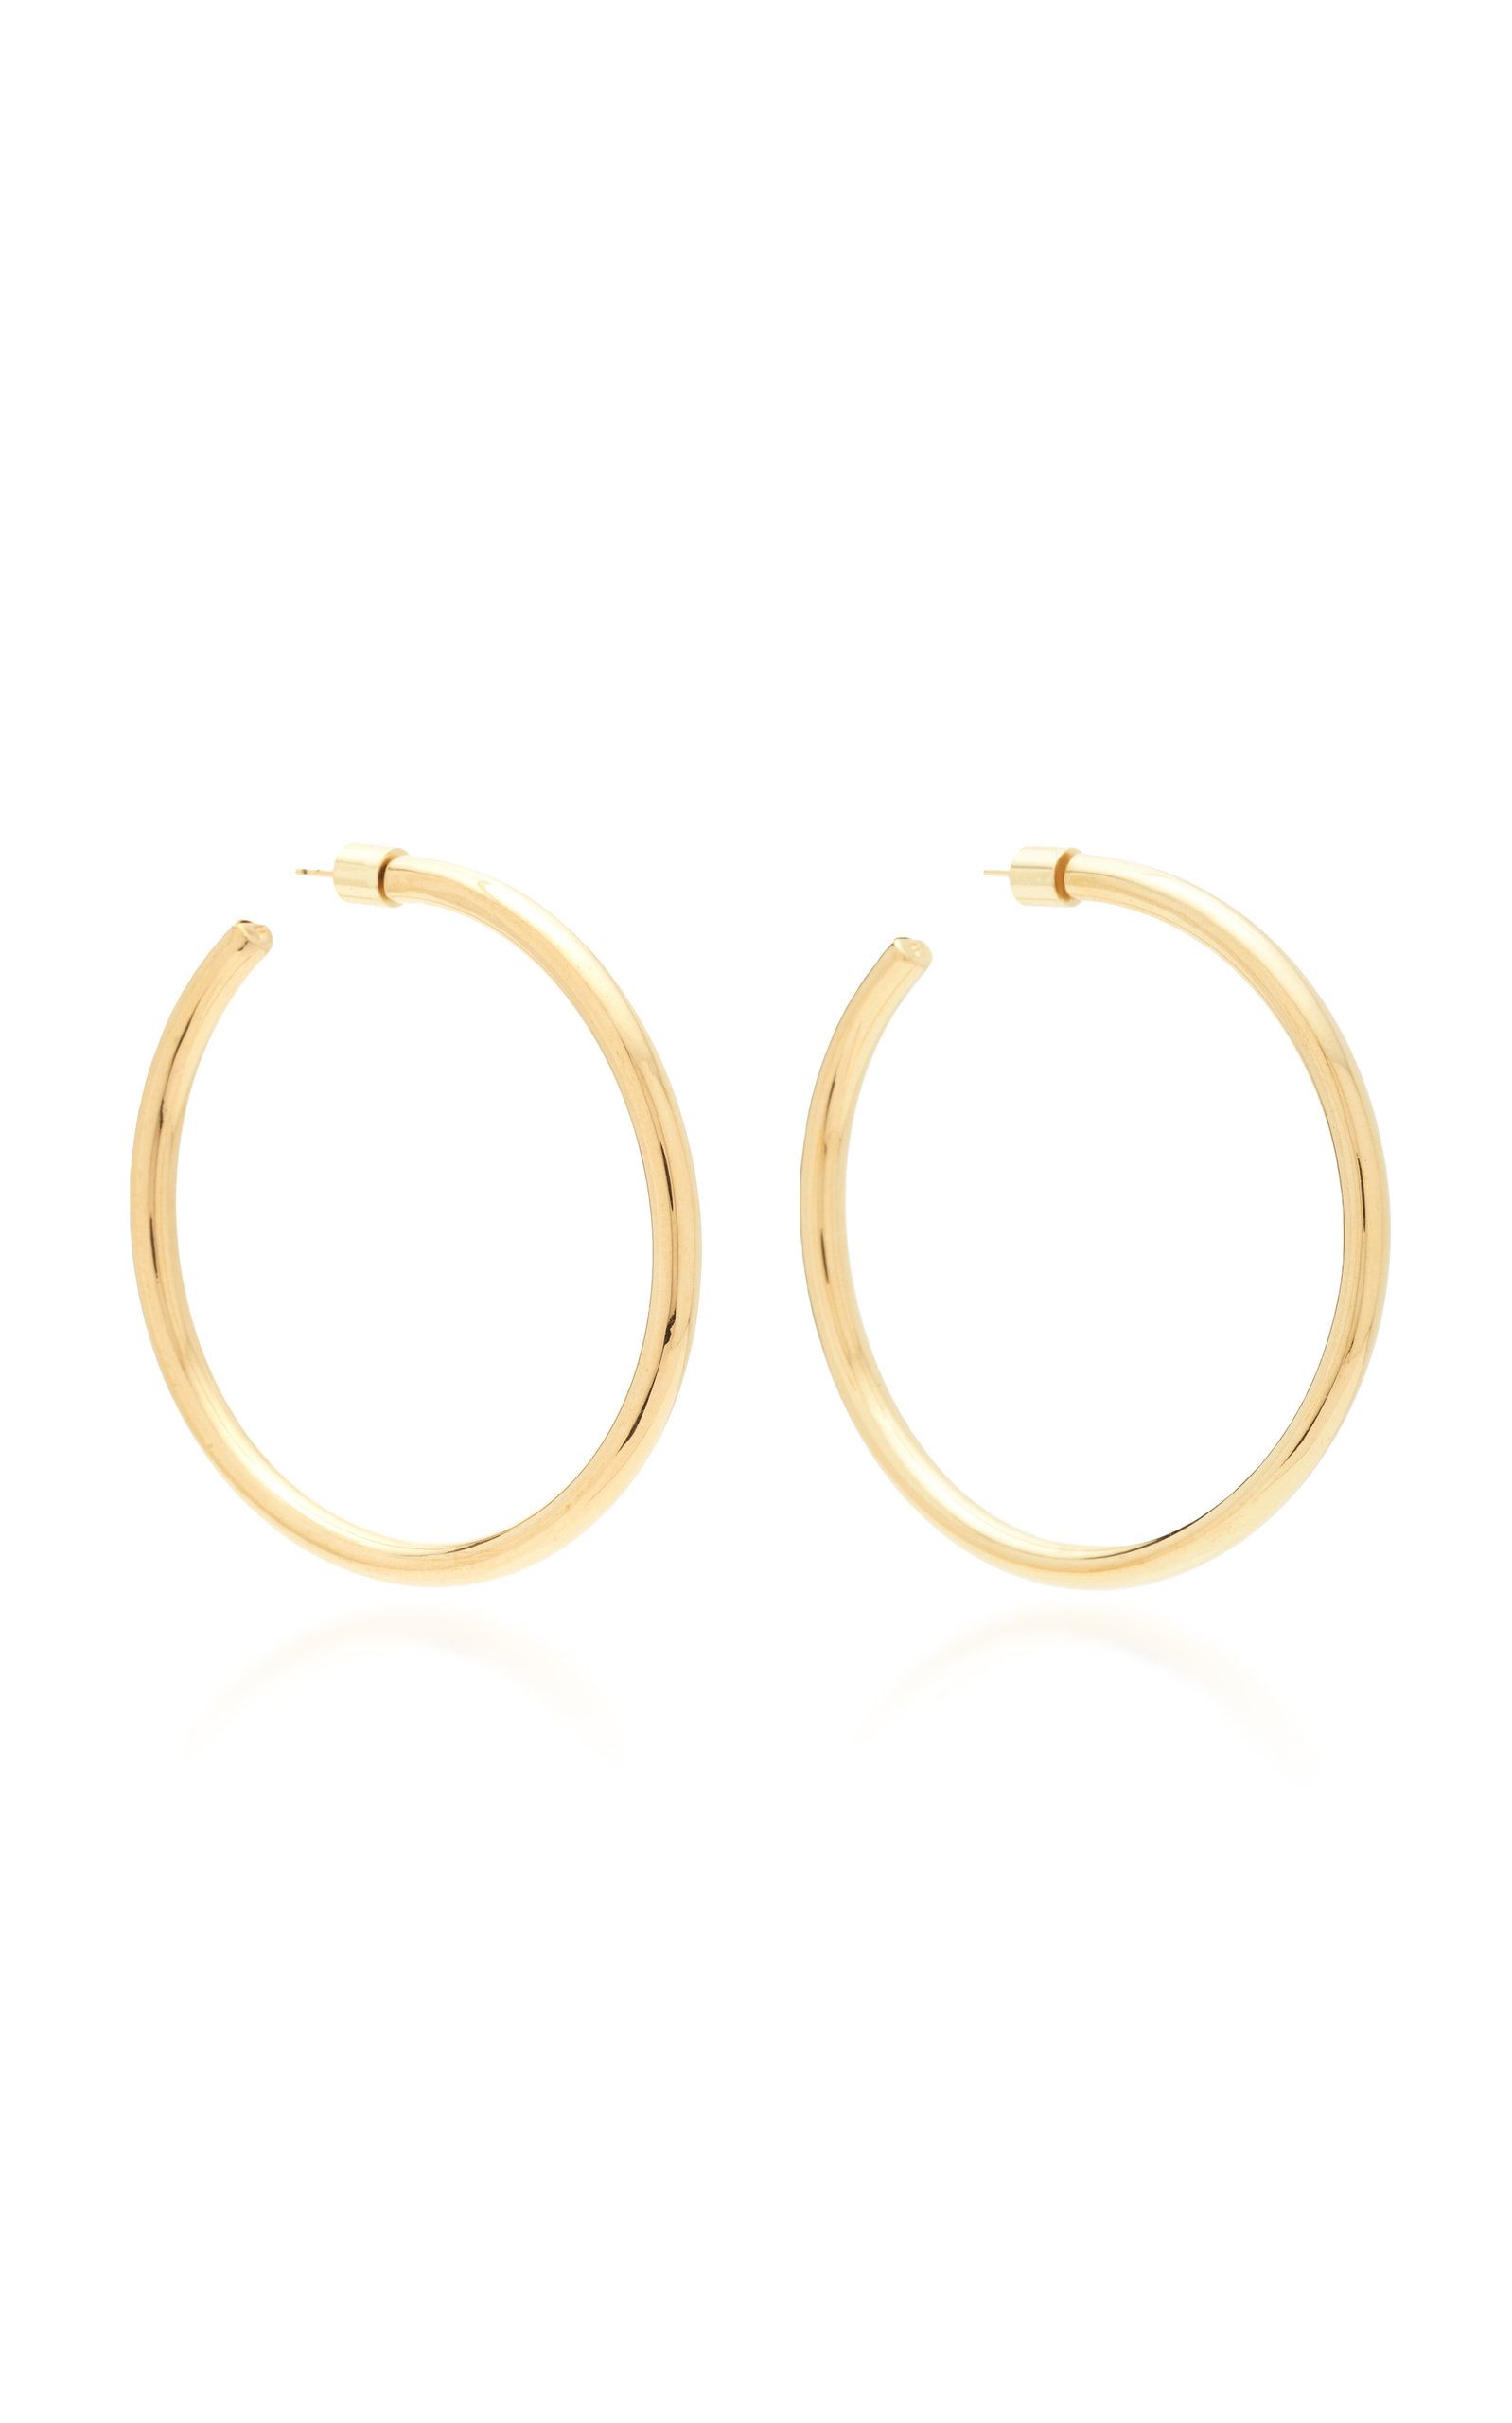 Lilly 10K Gold-Plated Hoop Earrings